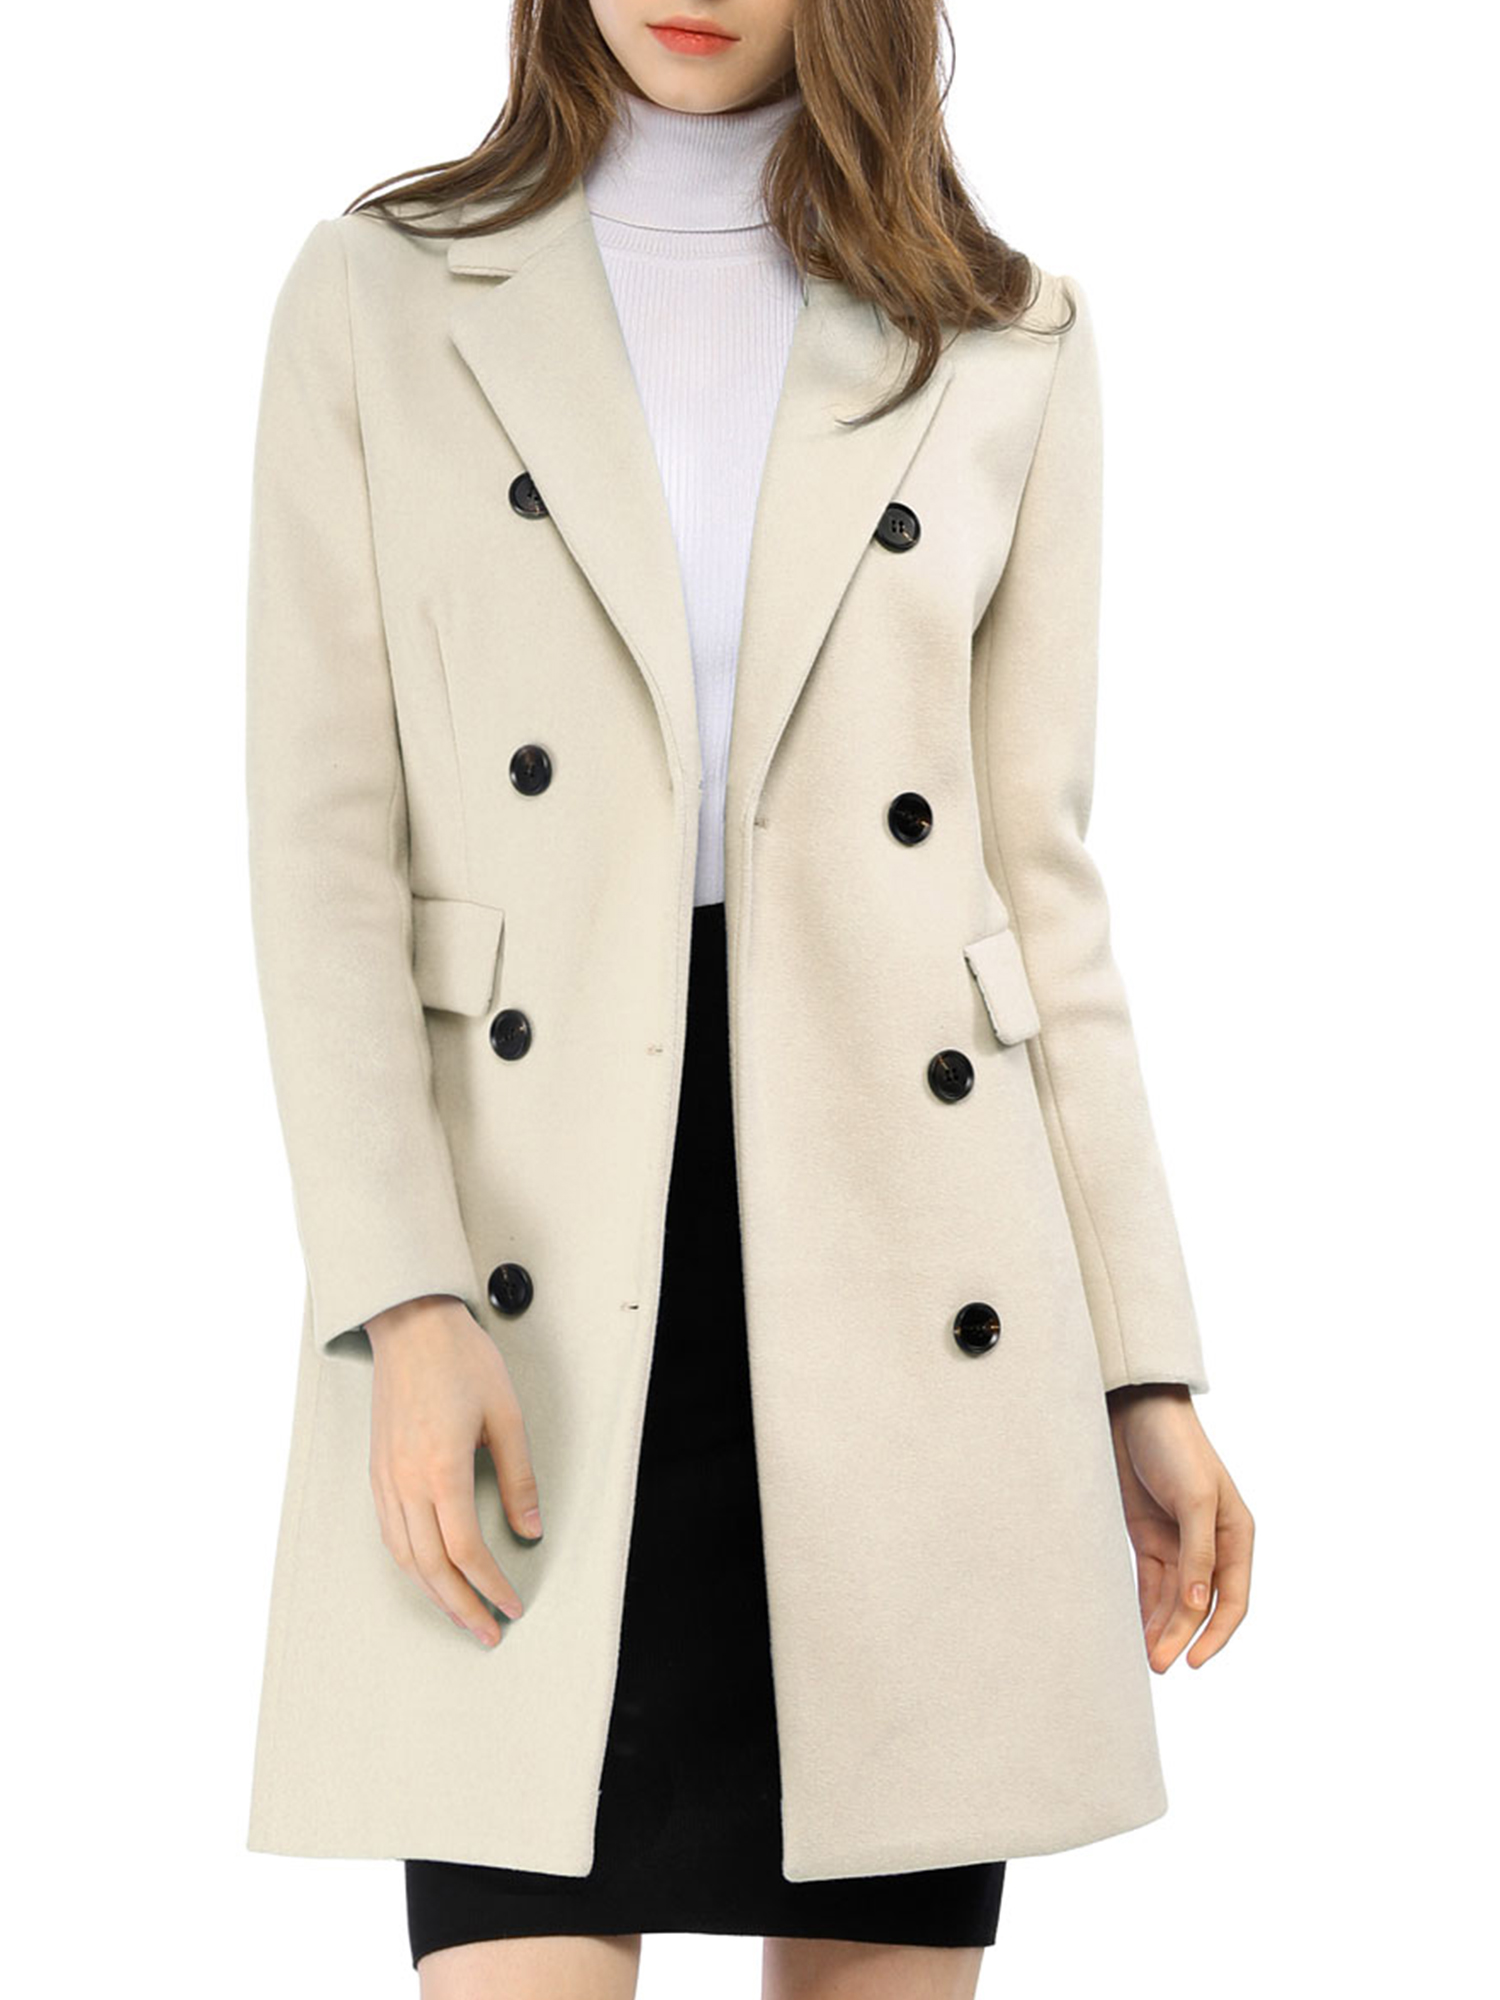 ZSHOW Women's Single Breasted Solid Color Classic Pea Coat 